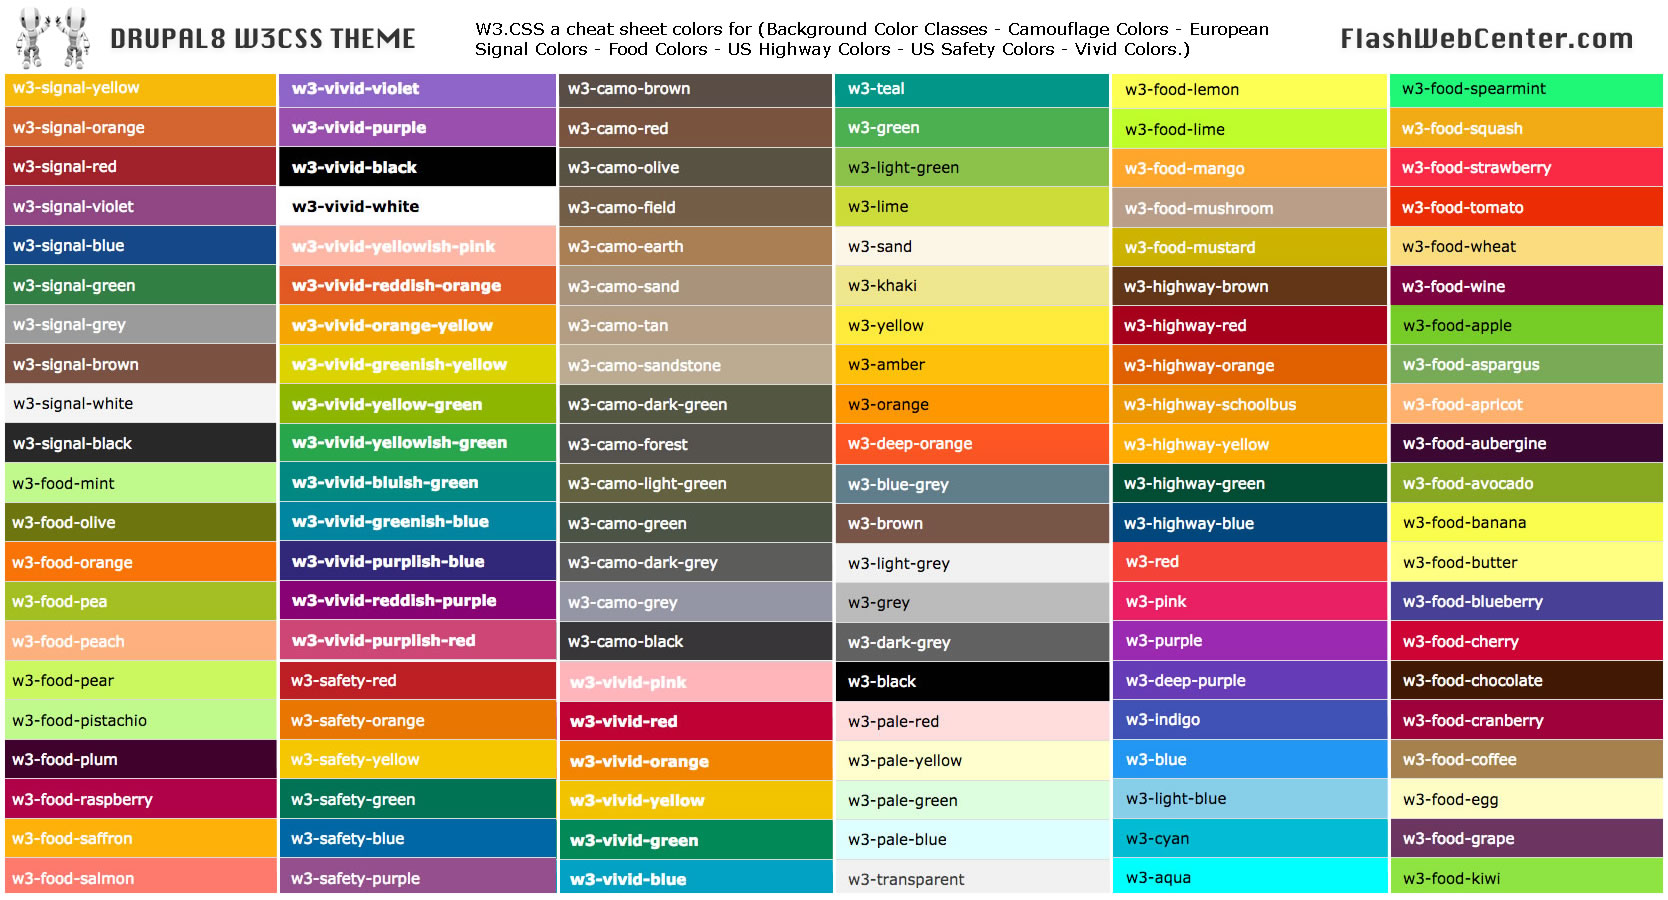 Css Color Chart